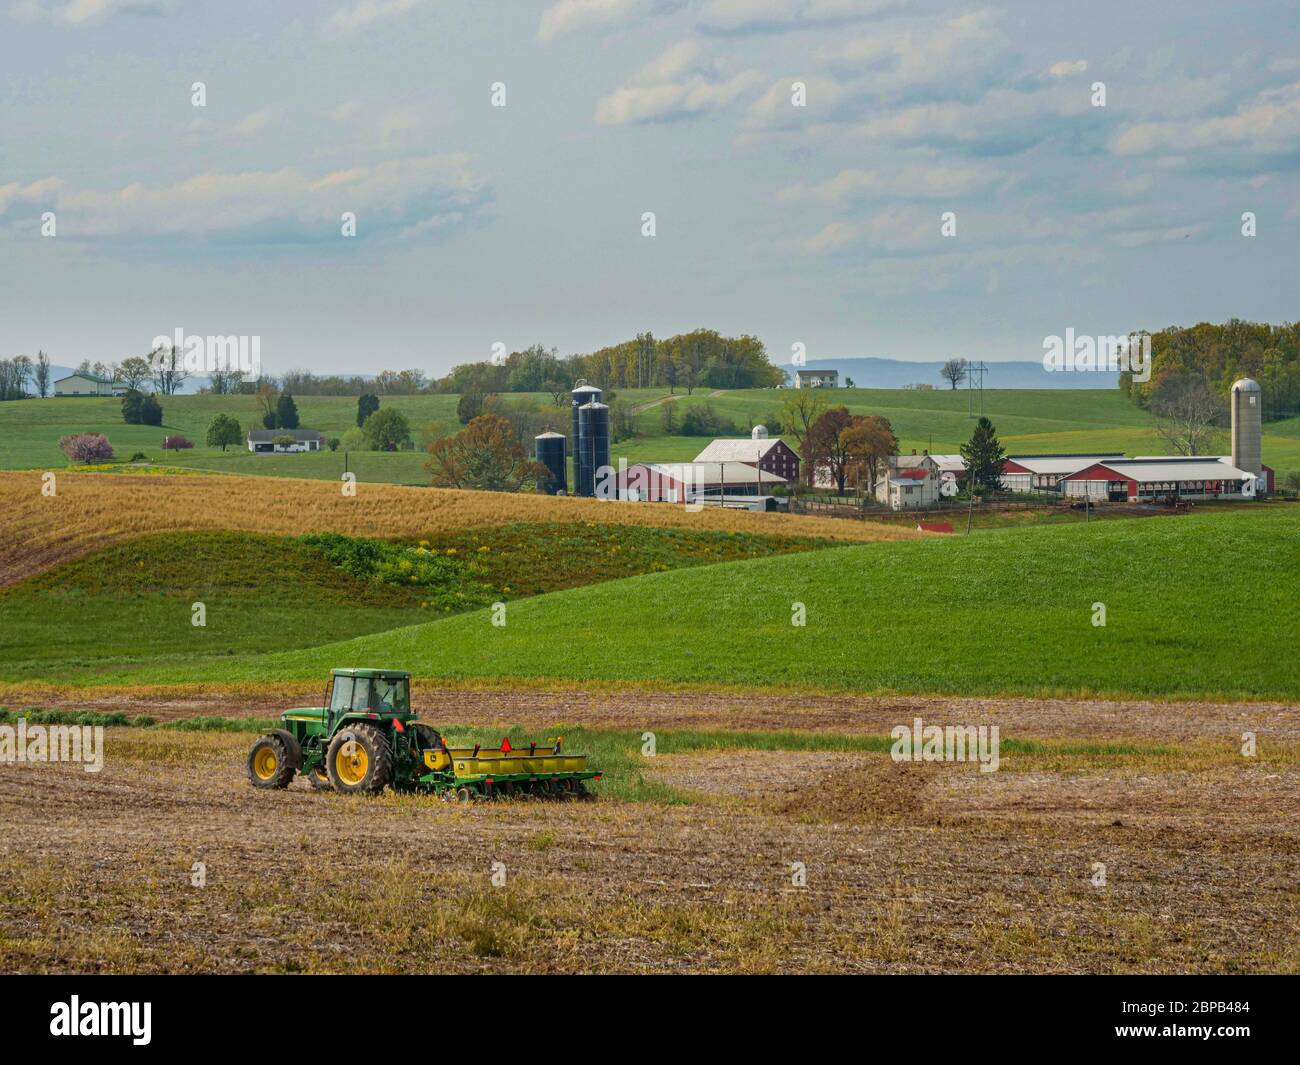 A farmer uses a tractor to prepare a no-till field for corn planting April 29, 2020 in Keymar, Maryland. Stock Photo